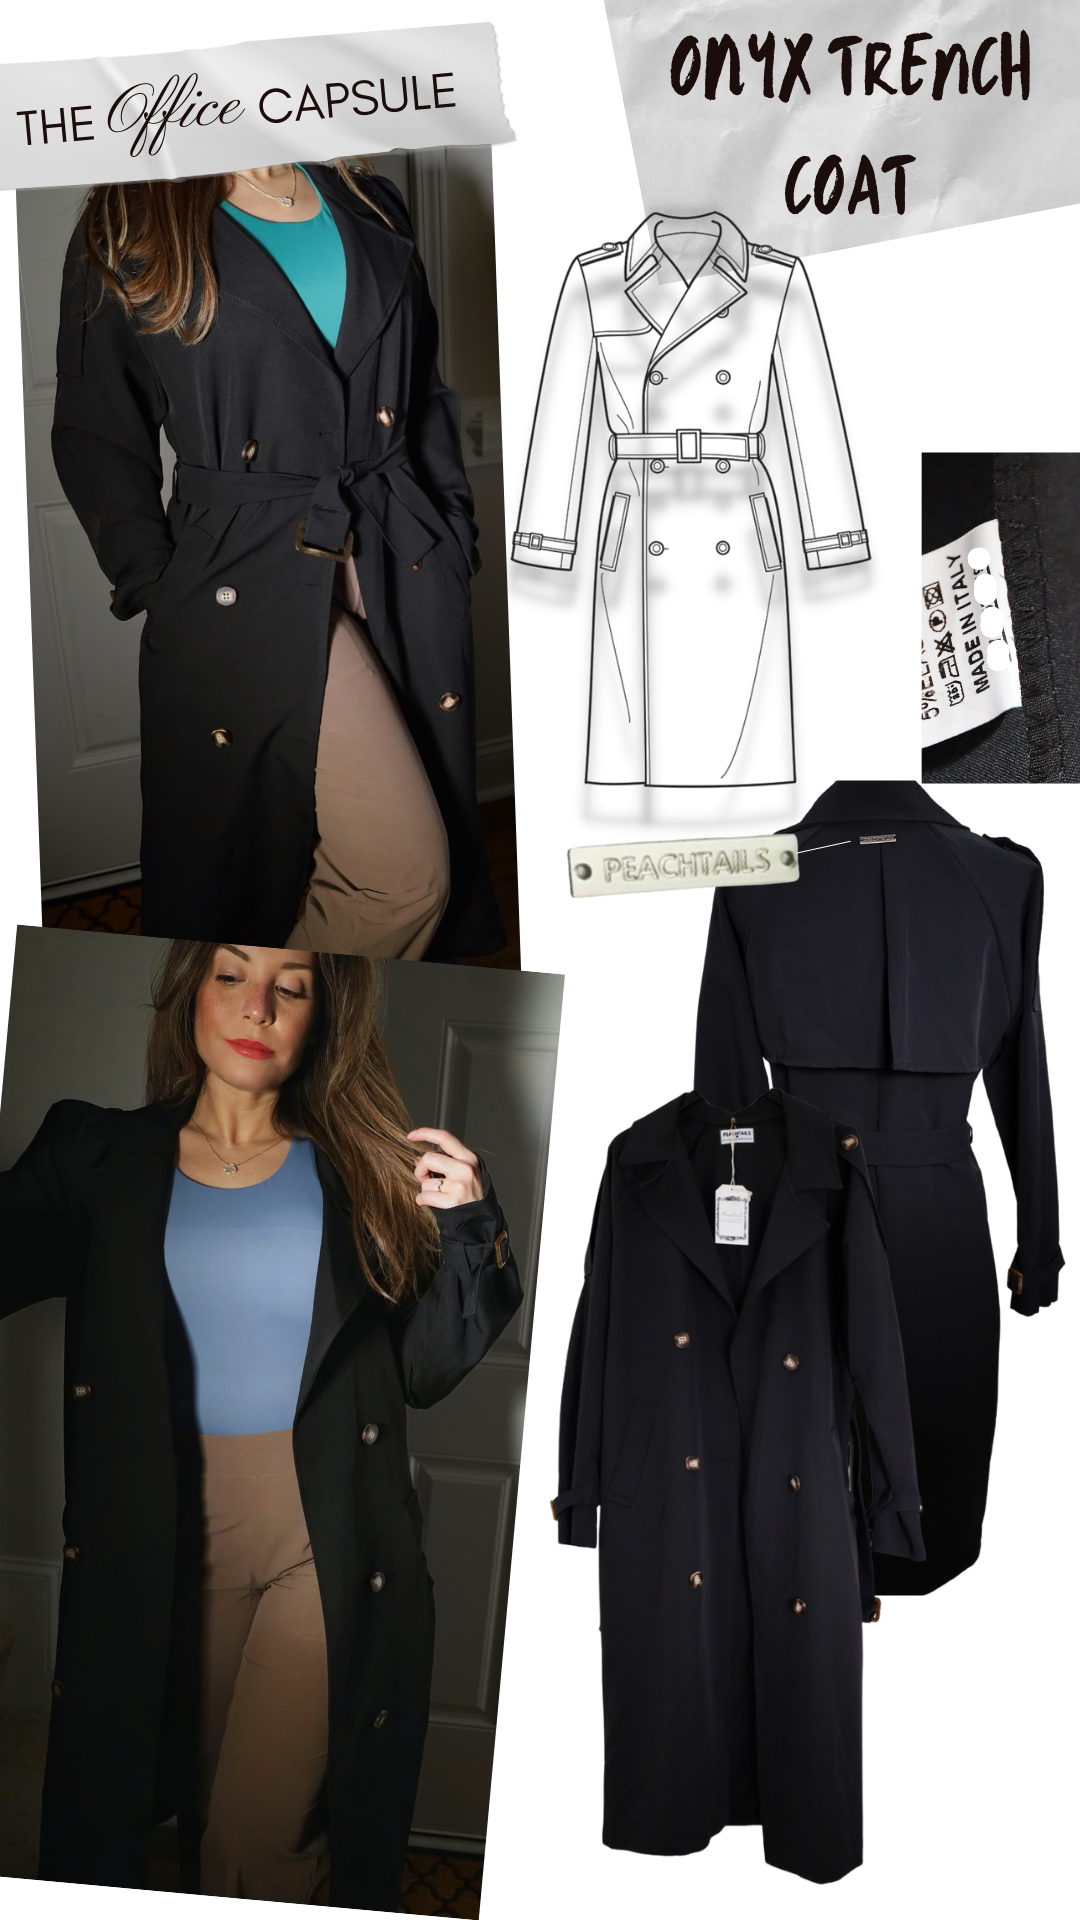 The image presents a collage for "THE OFFICE CAPSULE" featuring the "ONYX TRENCH COAT" from PEACHTAILS. It includes a photo of a woman wearing the trench coat, a sketch of the coat design, and a PEACHTAILS garment tag, suggesting a stylish and contemporary approach to professional wear. The design elements and the coat itself are predominantly black, exuding elegance and sophistication.